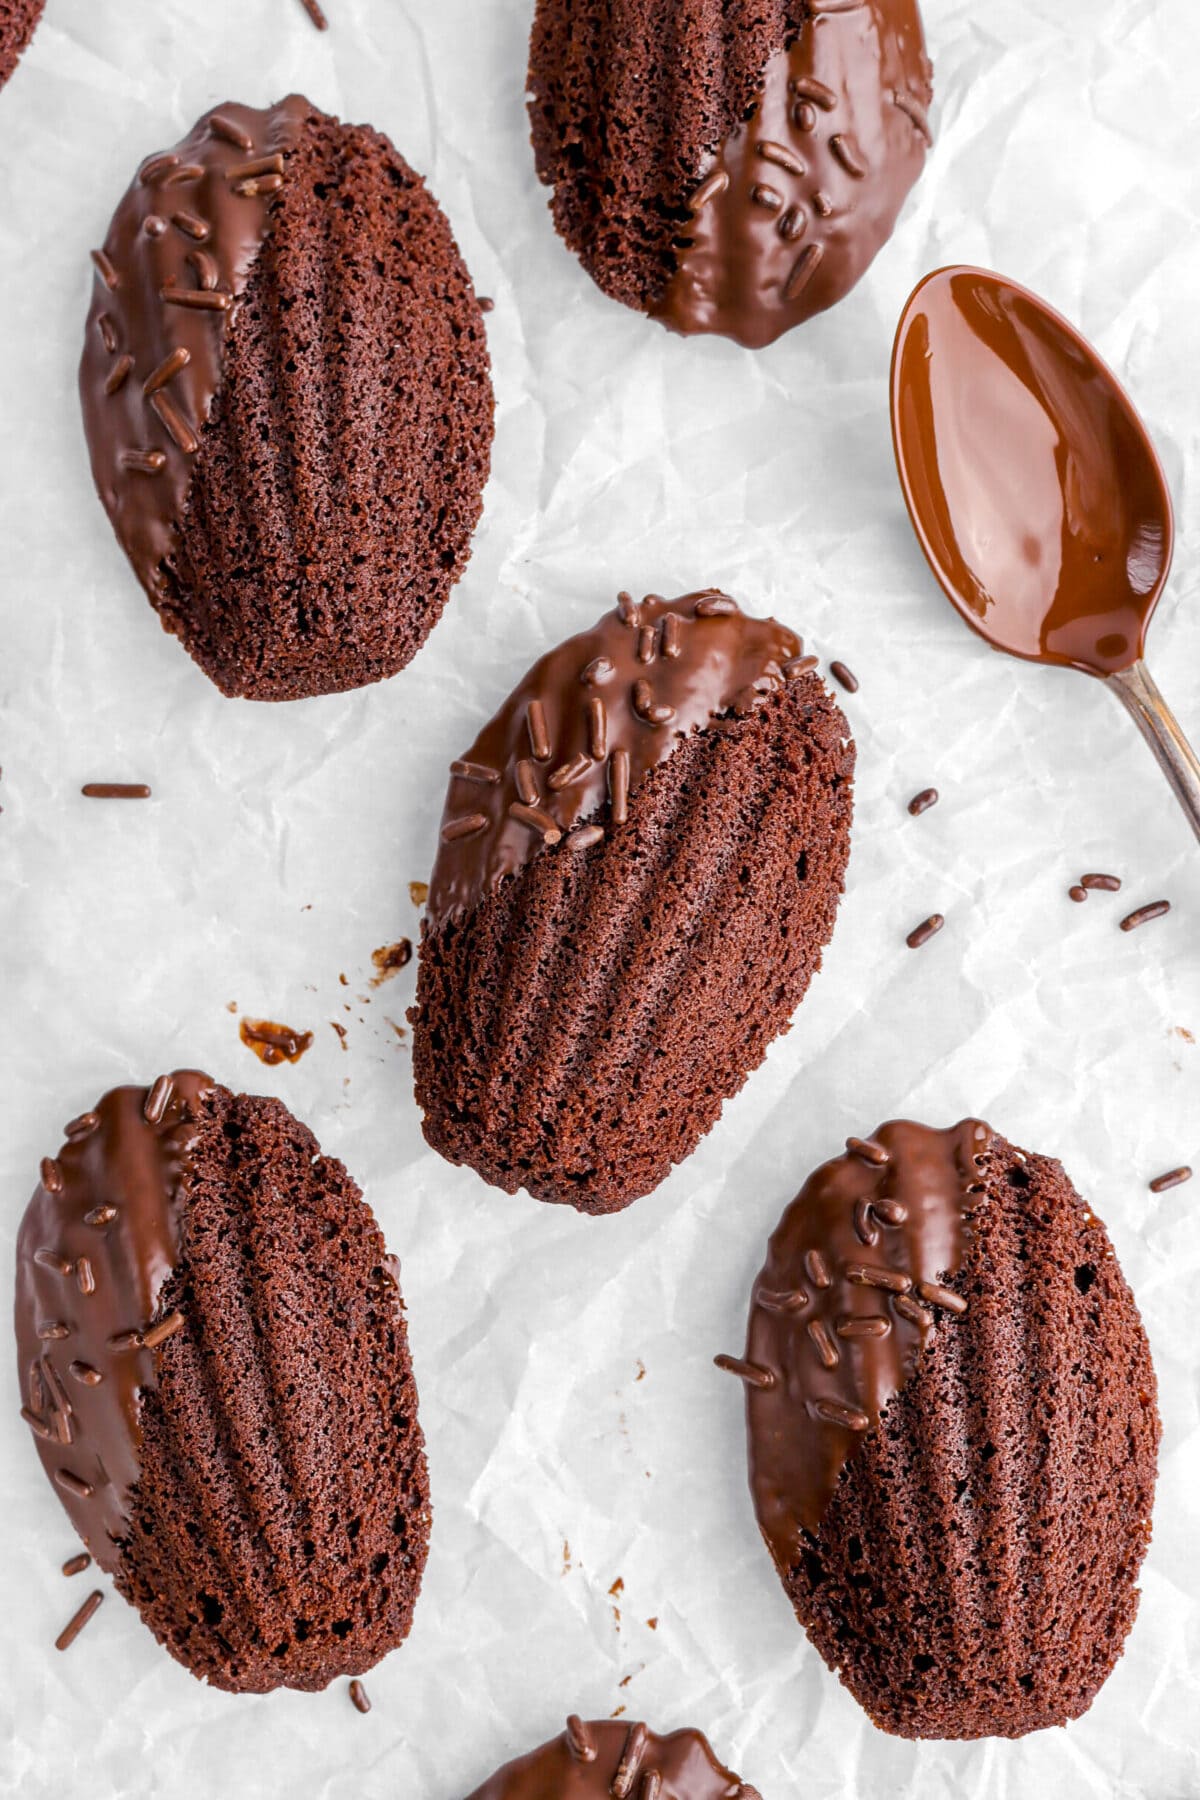 close up of chocolate dipped madeleines on parchment paper with chocolate coated spoon beside.